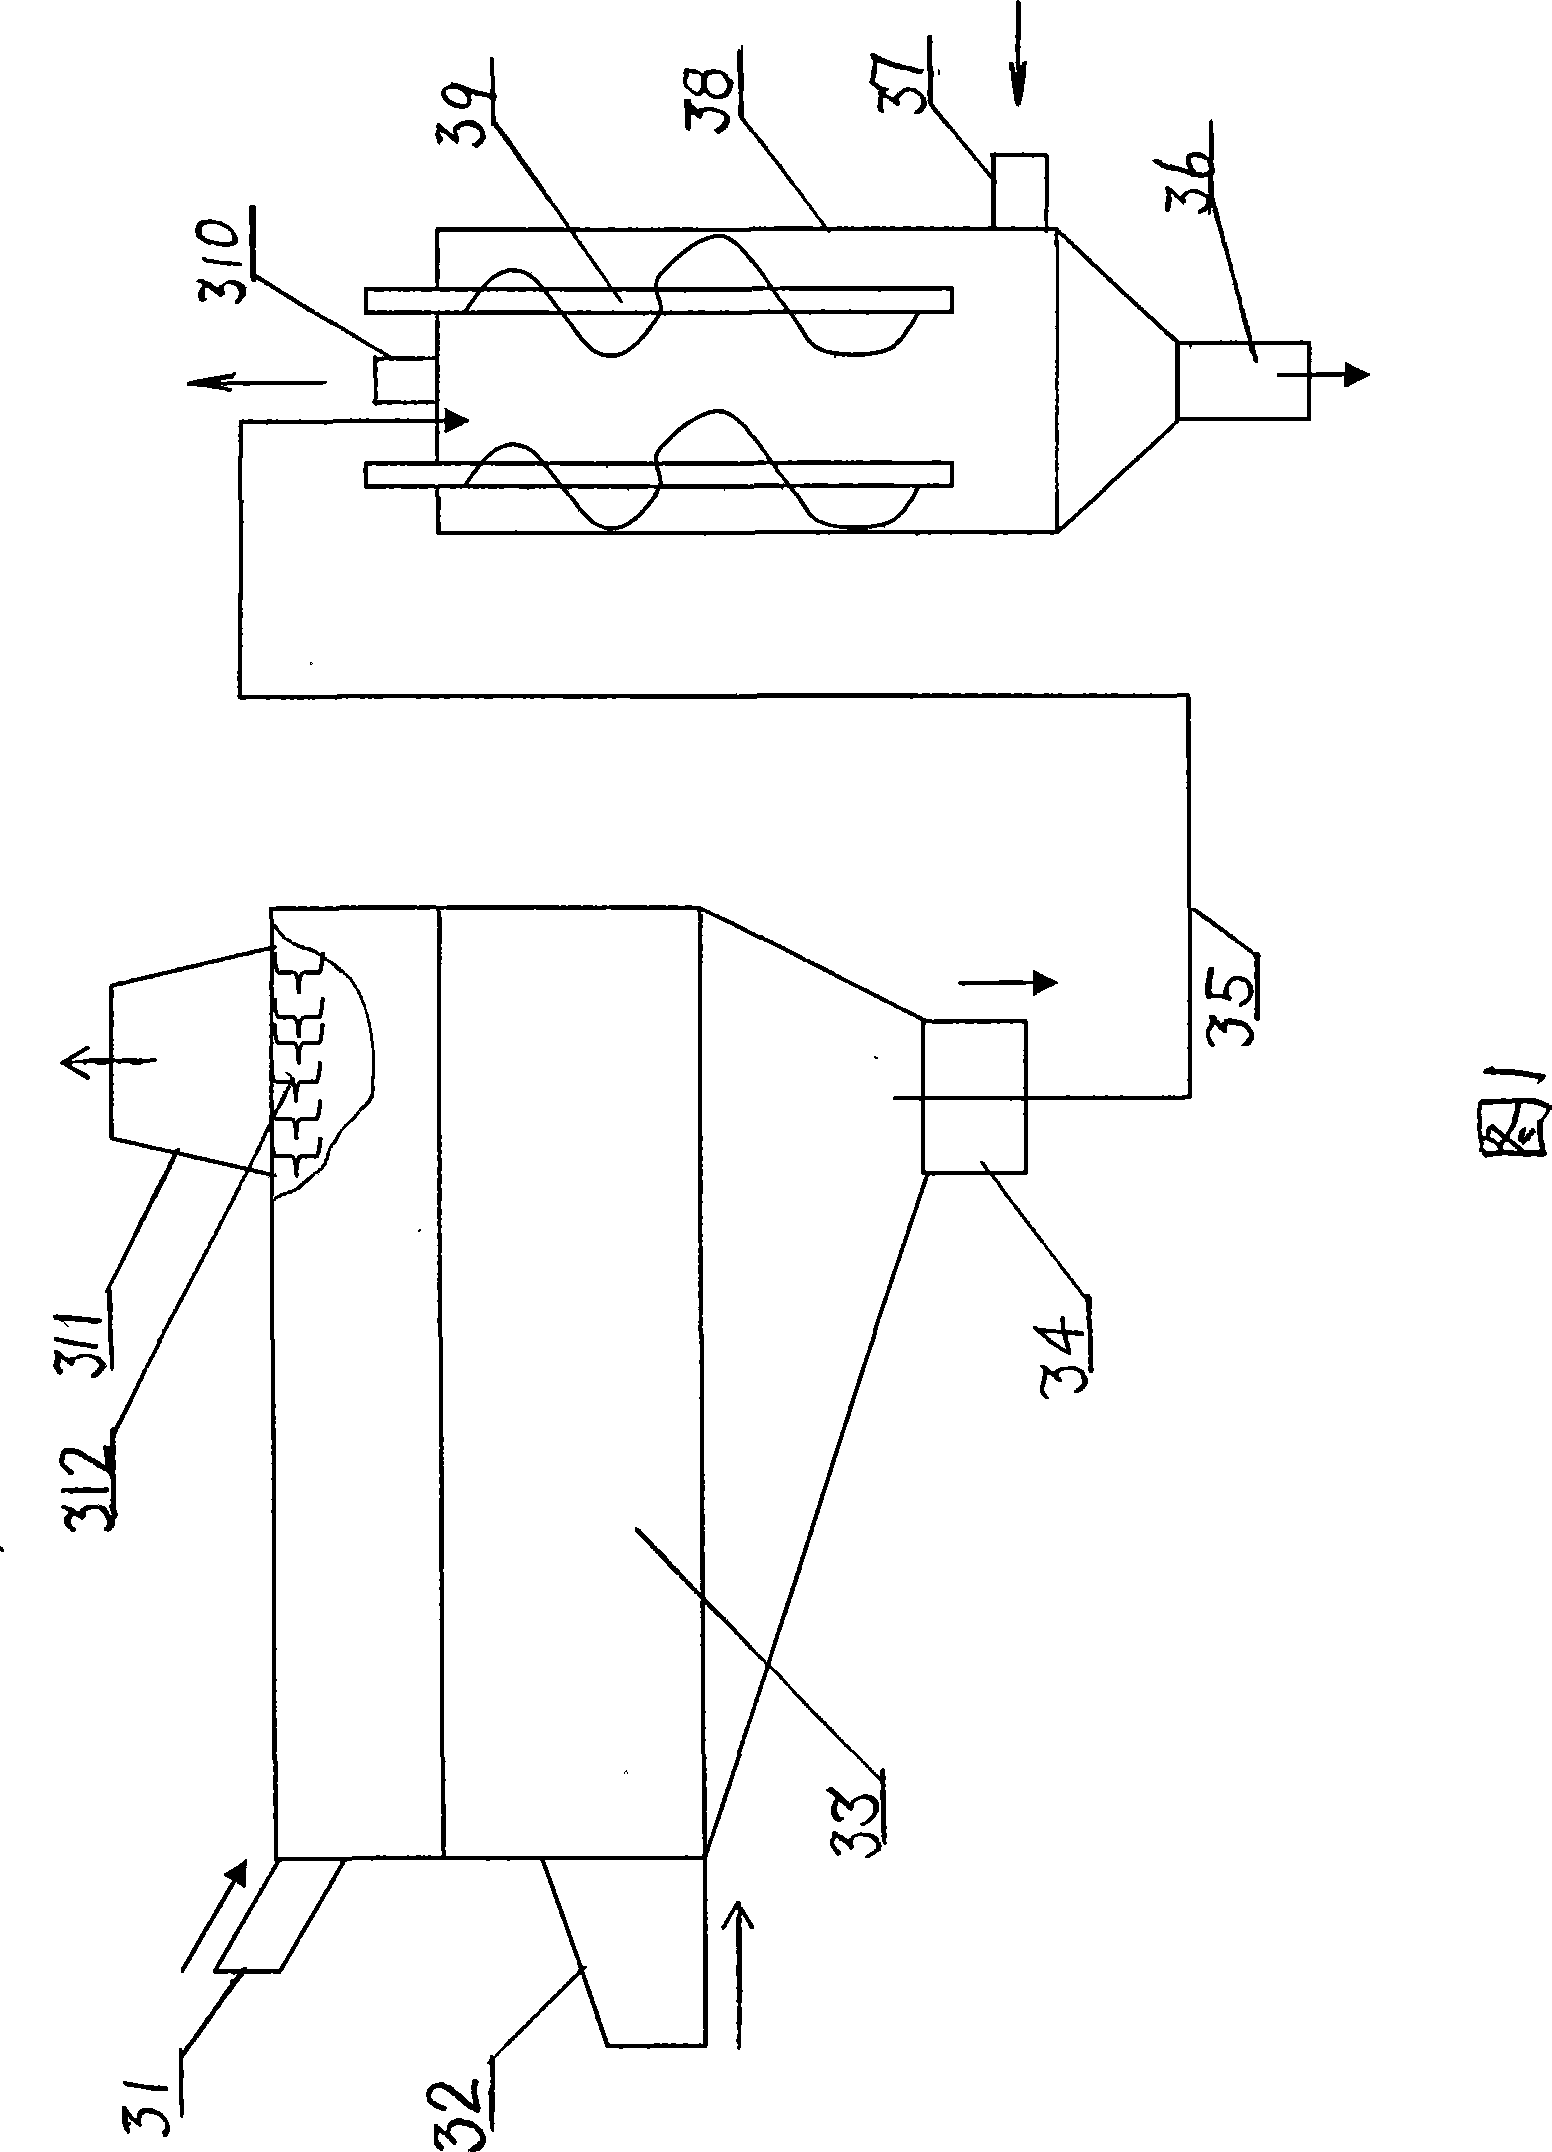 Method for producing terylene POY filament in scale by recycling PET bottle sheet material